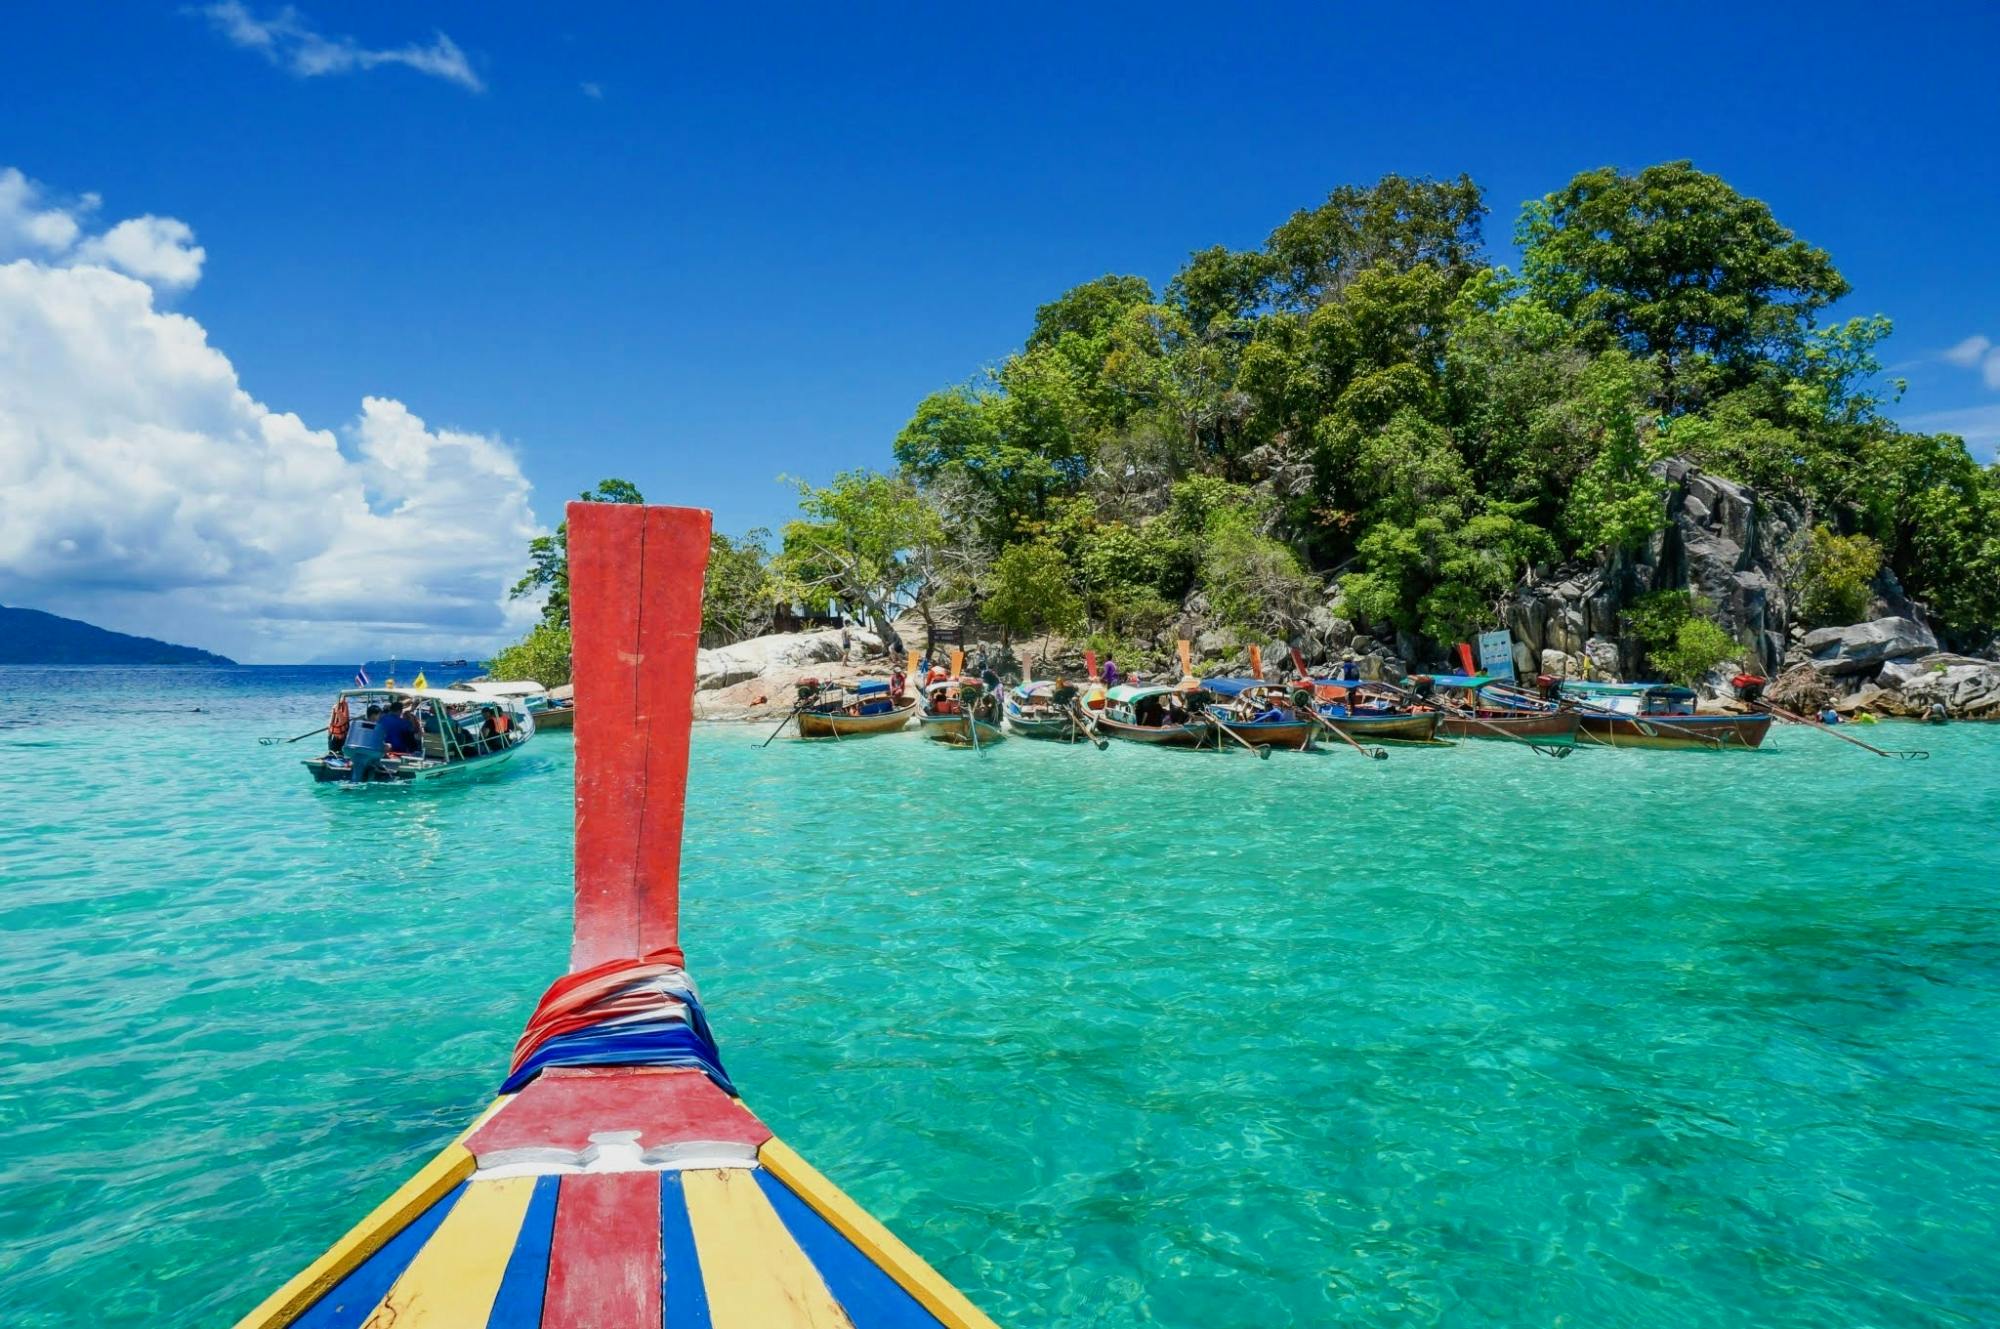 Guided tour of the Koh Lipe Frontier in the Eastern Adang Archipelago